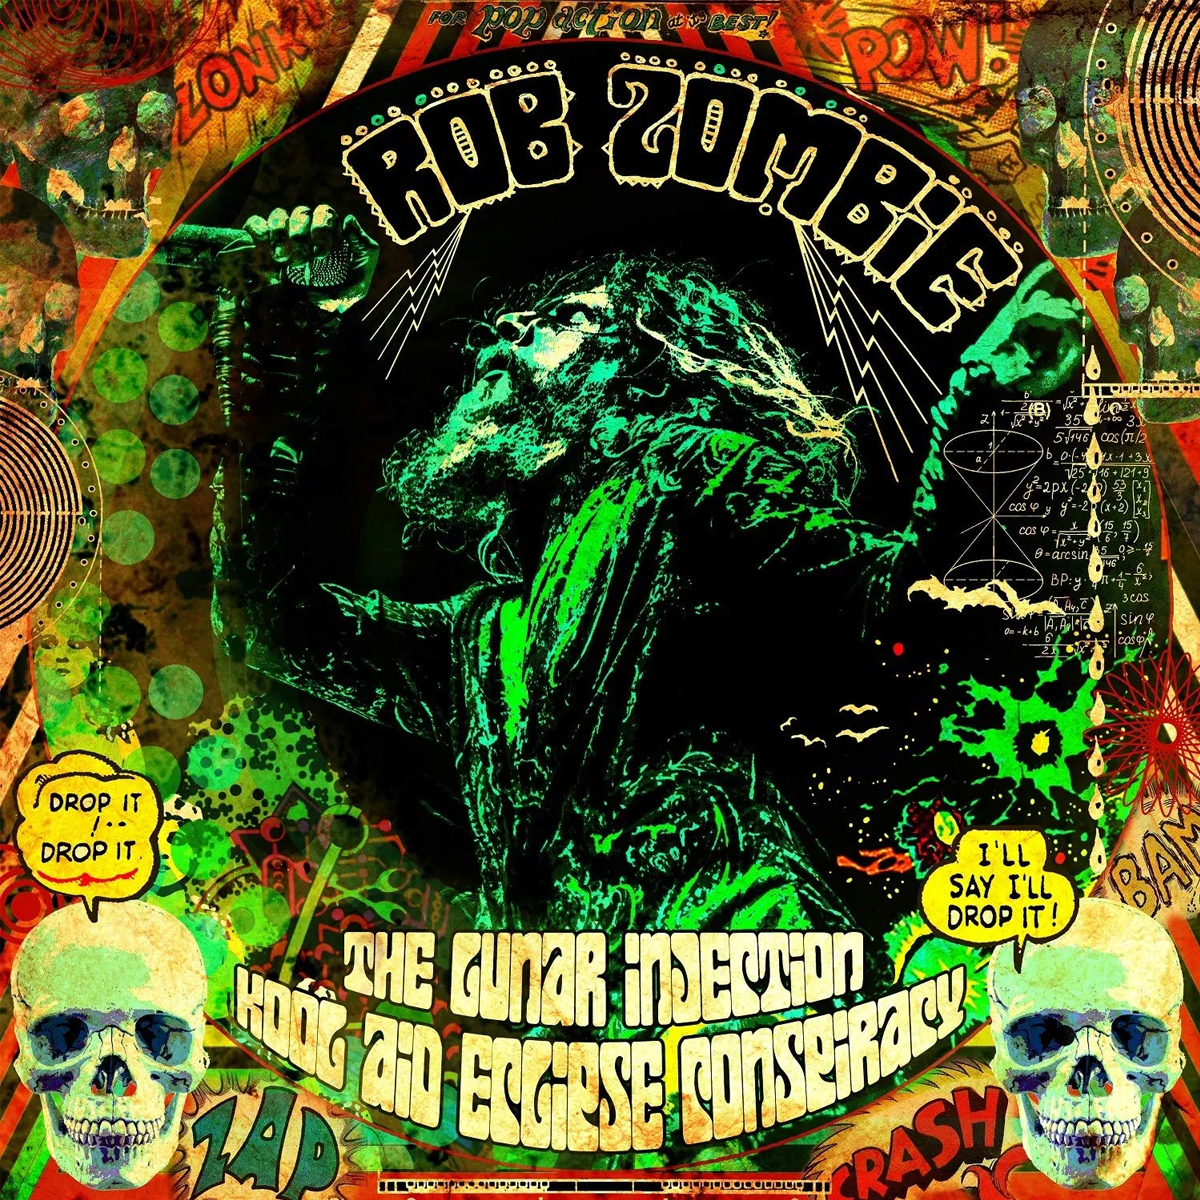 ROB ZOMBIE - The Lunar Injection Kool Aid Eclipse Conspiracy”